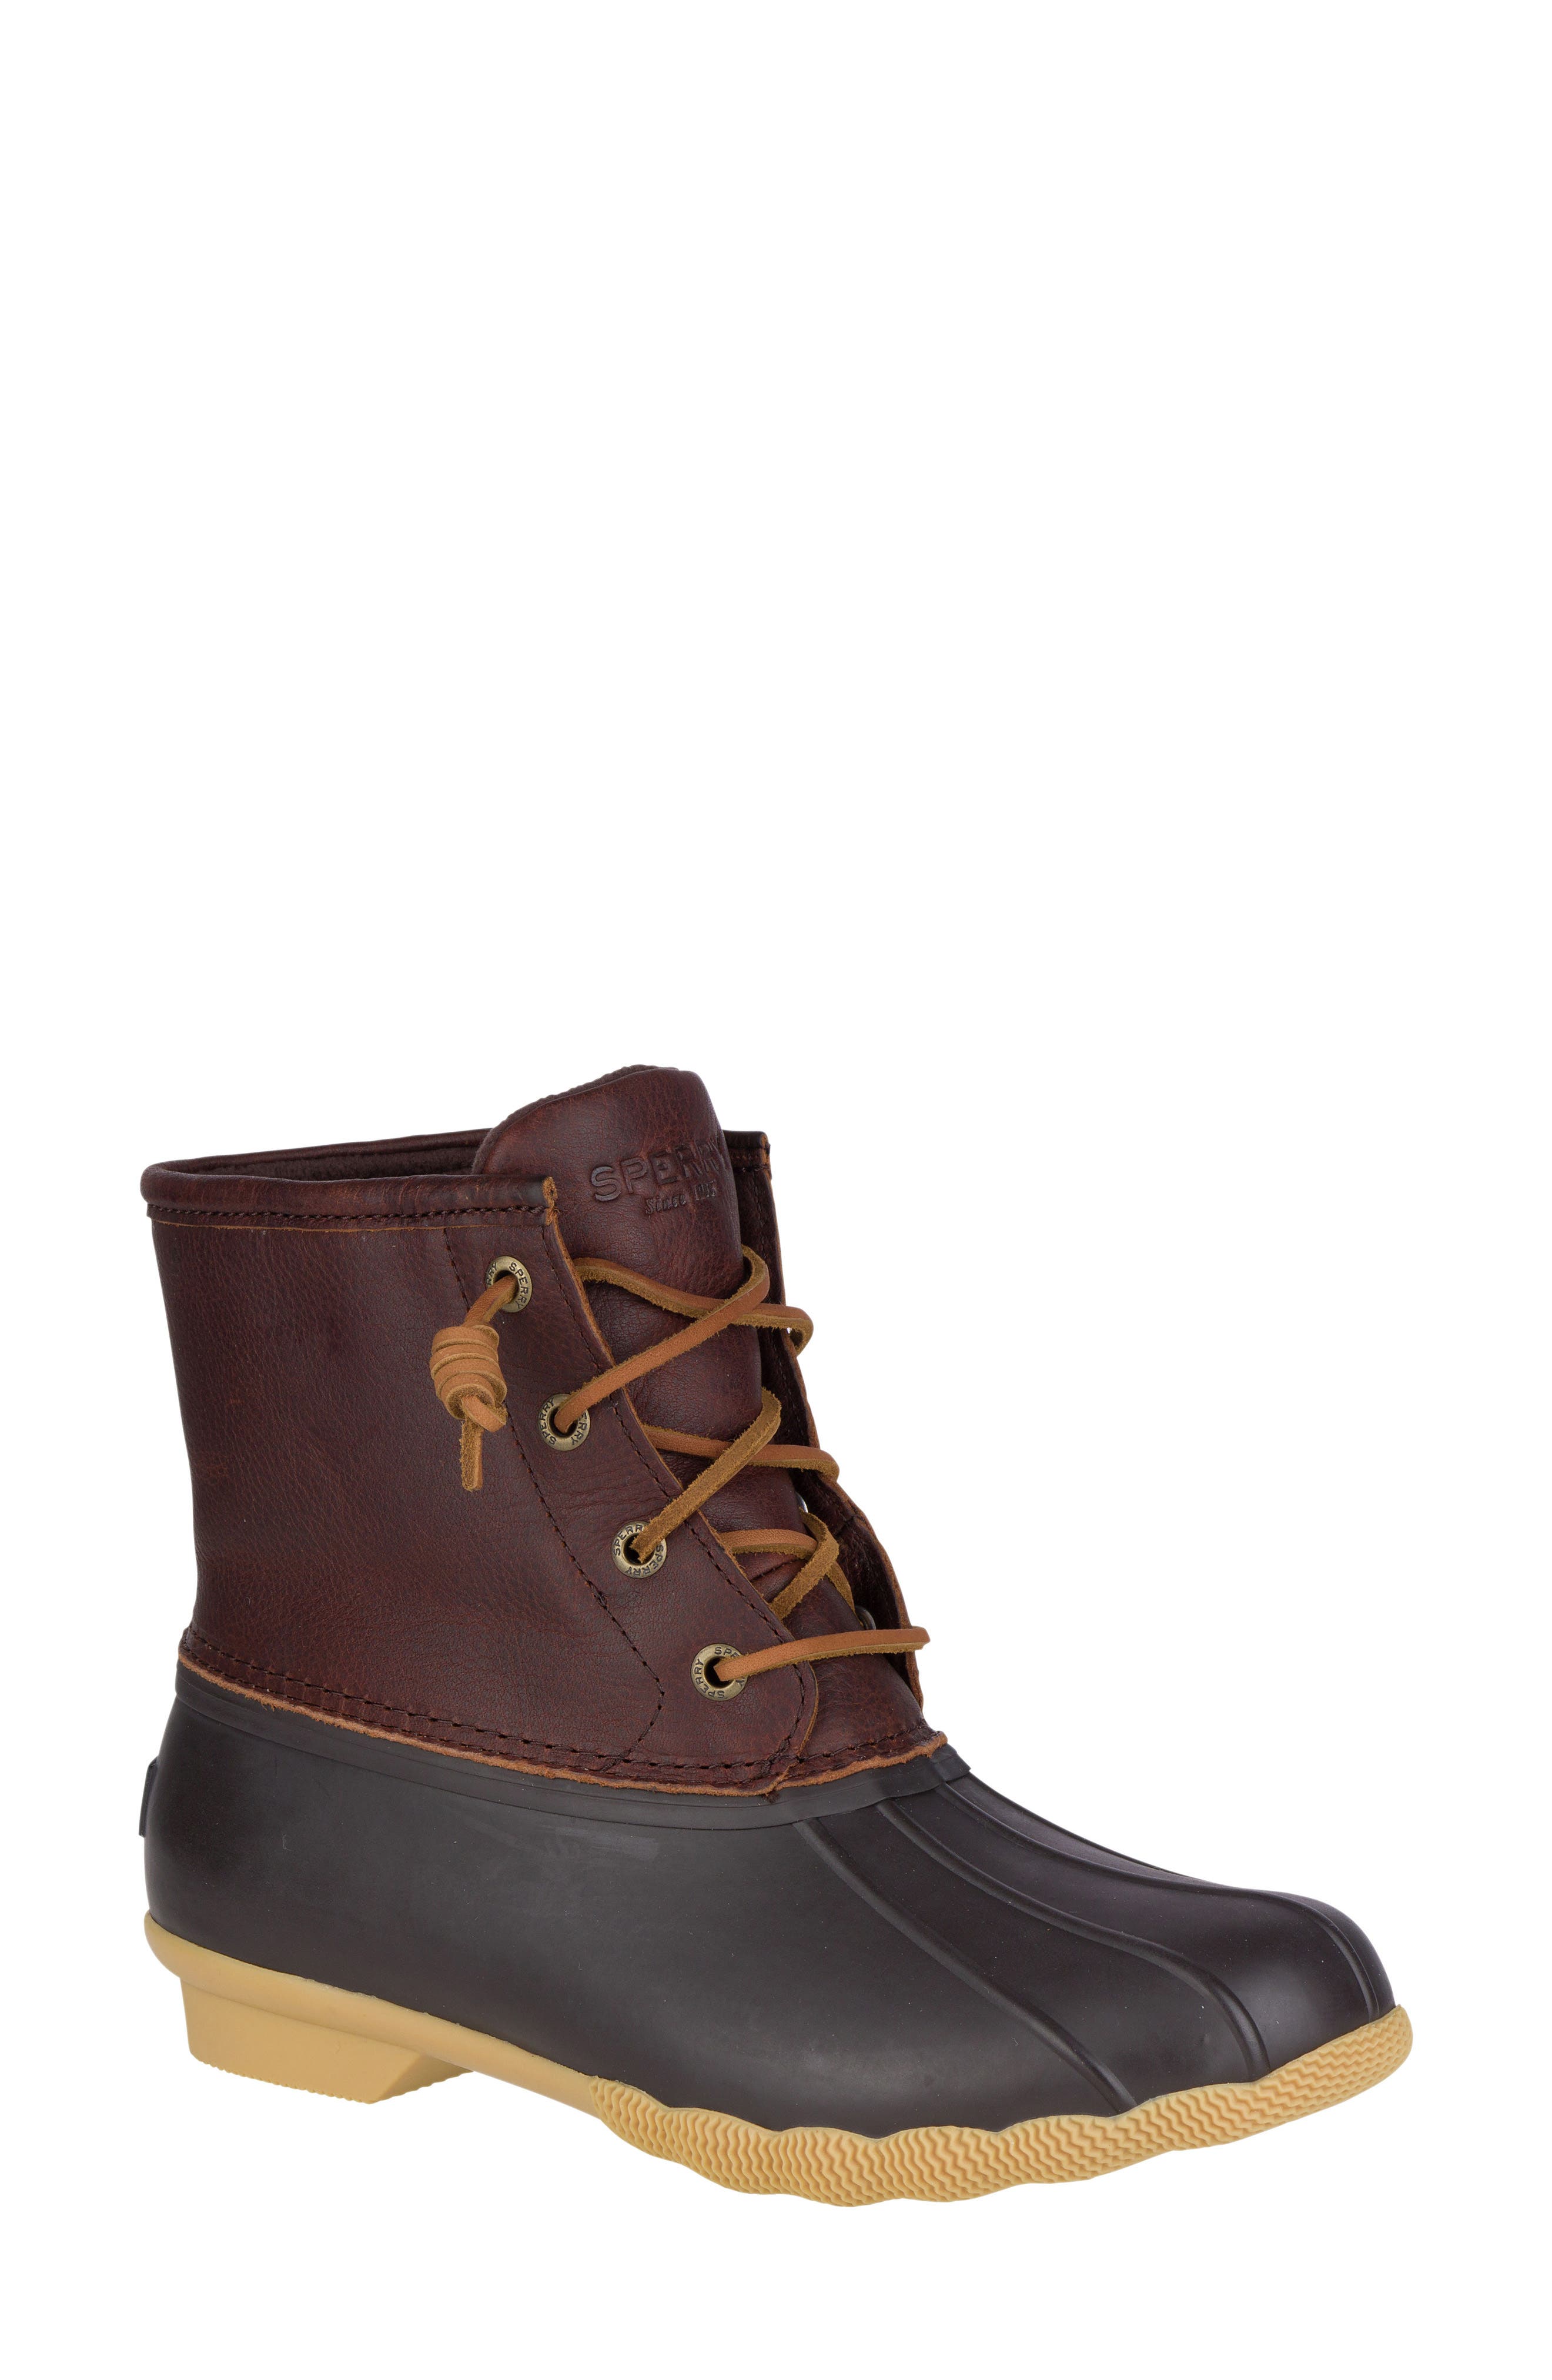 sperry duck boots womens thinsulate